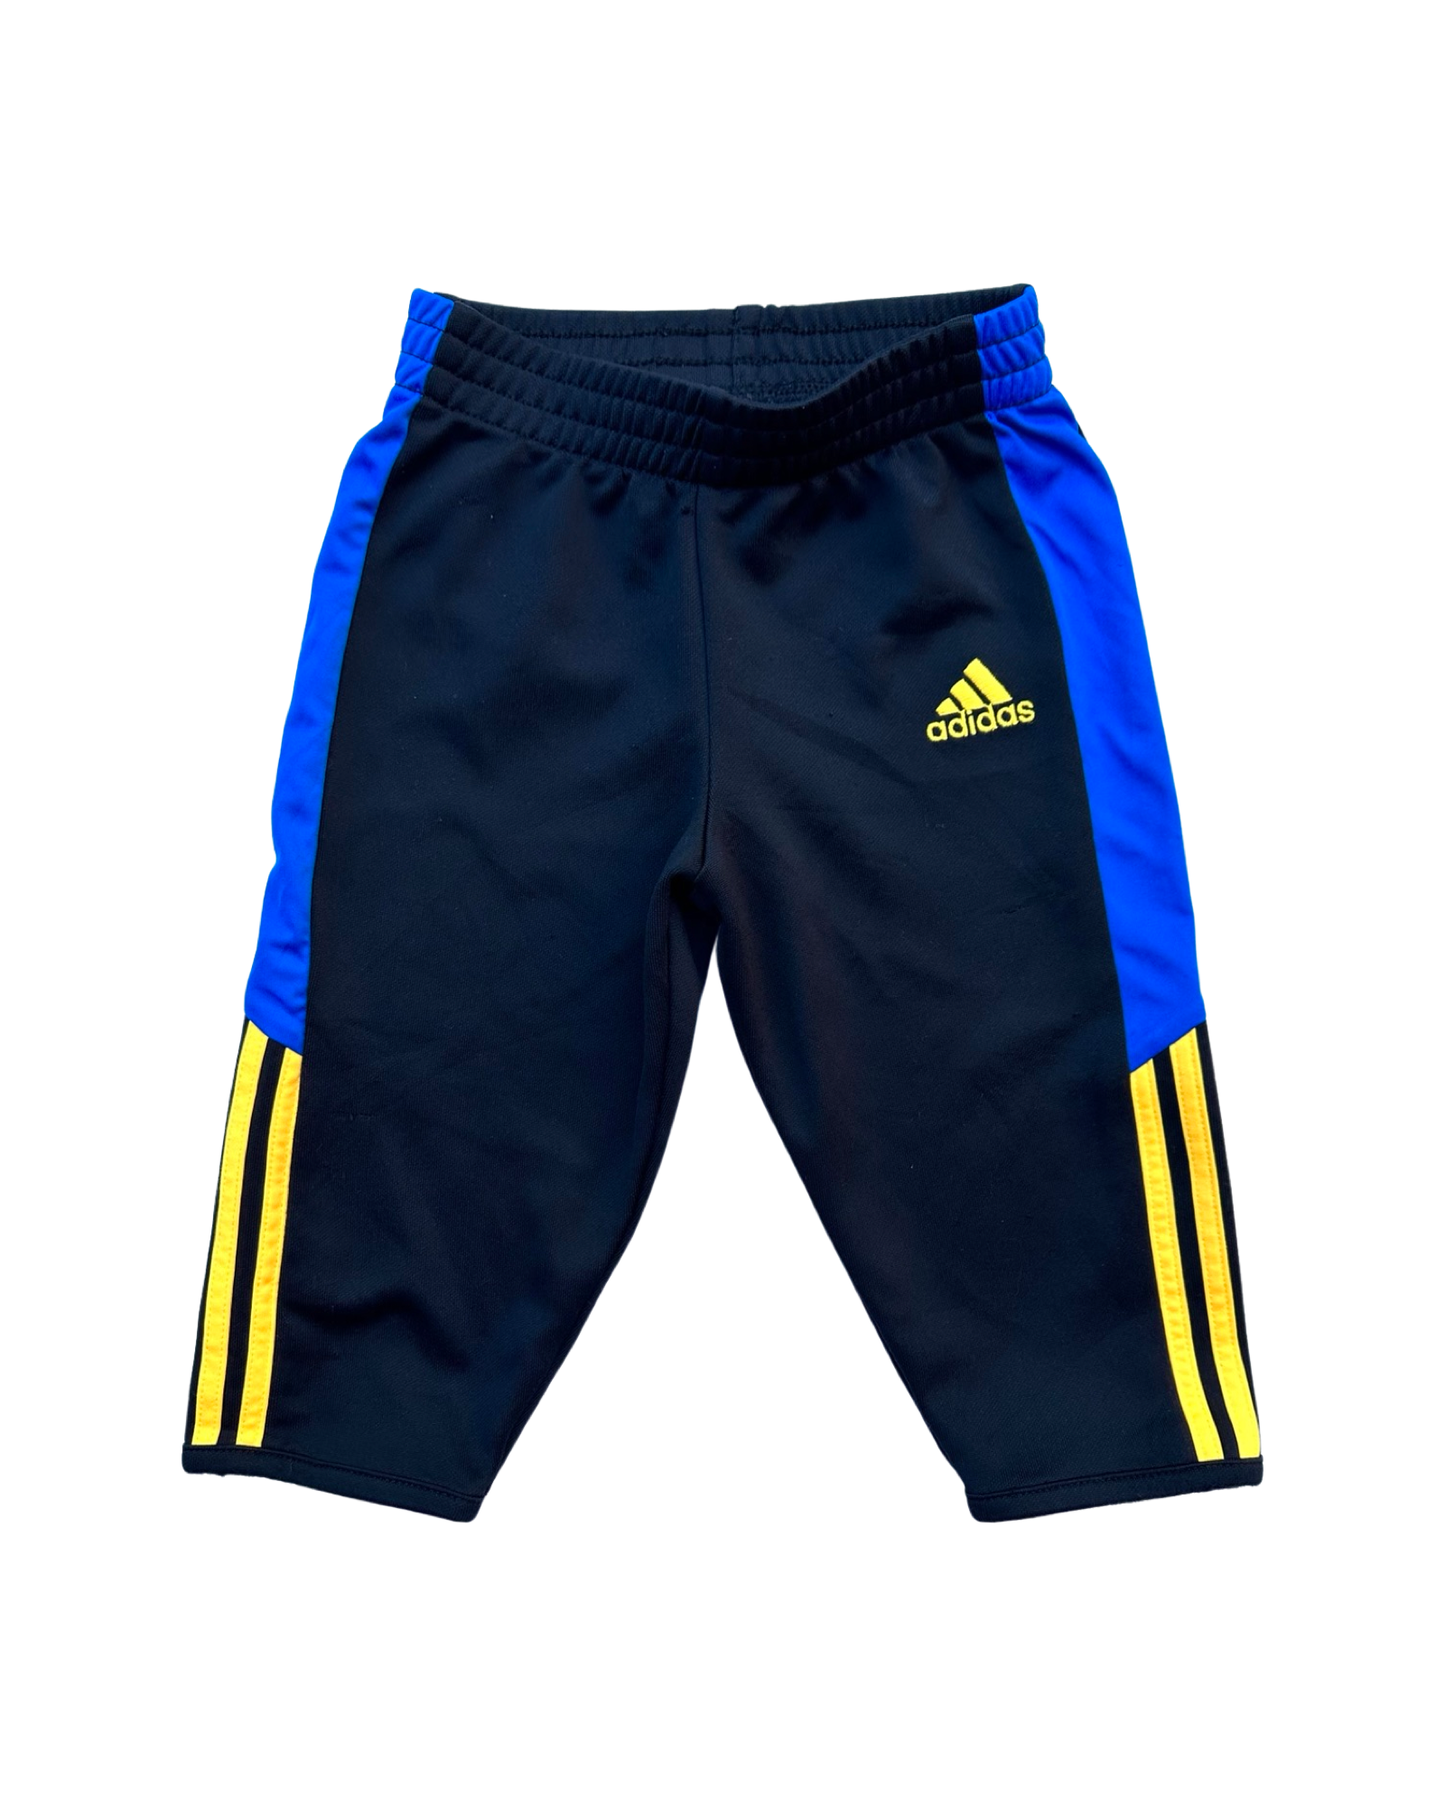 Vintage Adidas 3 stripe joggers in black/blue/yellow (9-12mths)